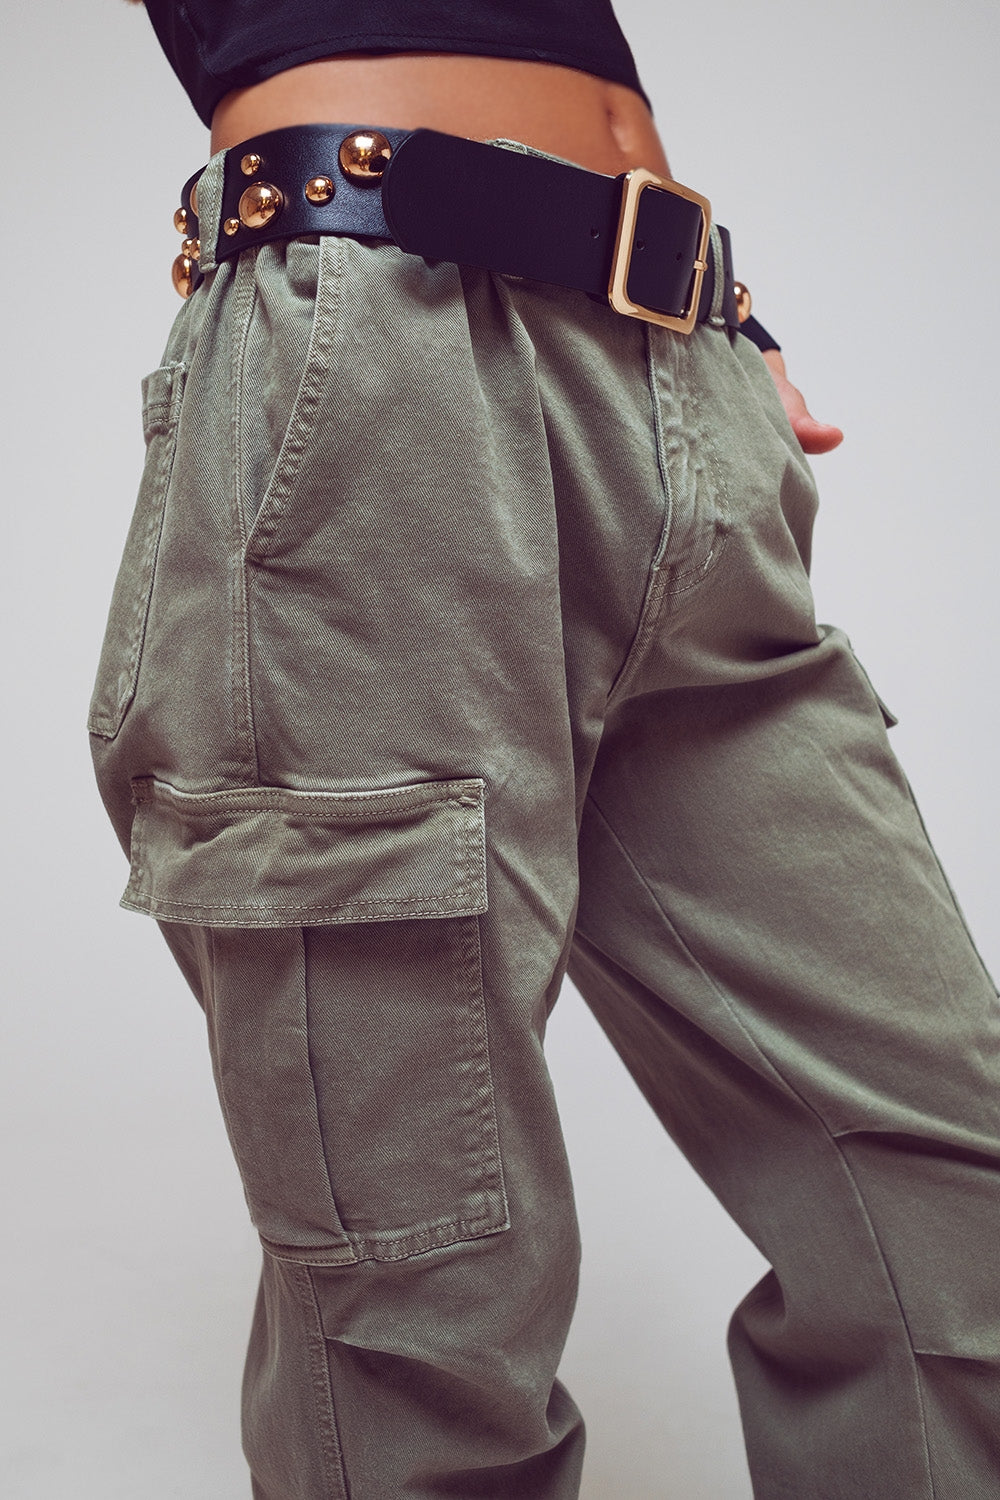 Cargo Pants With Tassel Ends in Military Green - lolaluxeshop